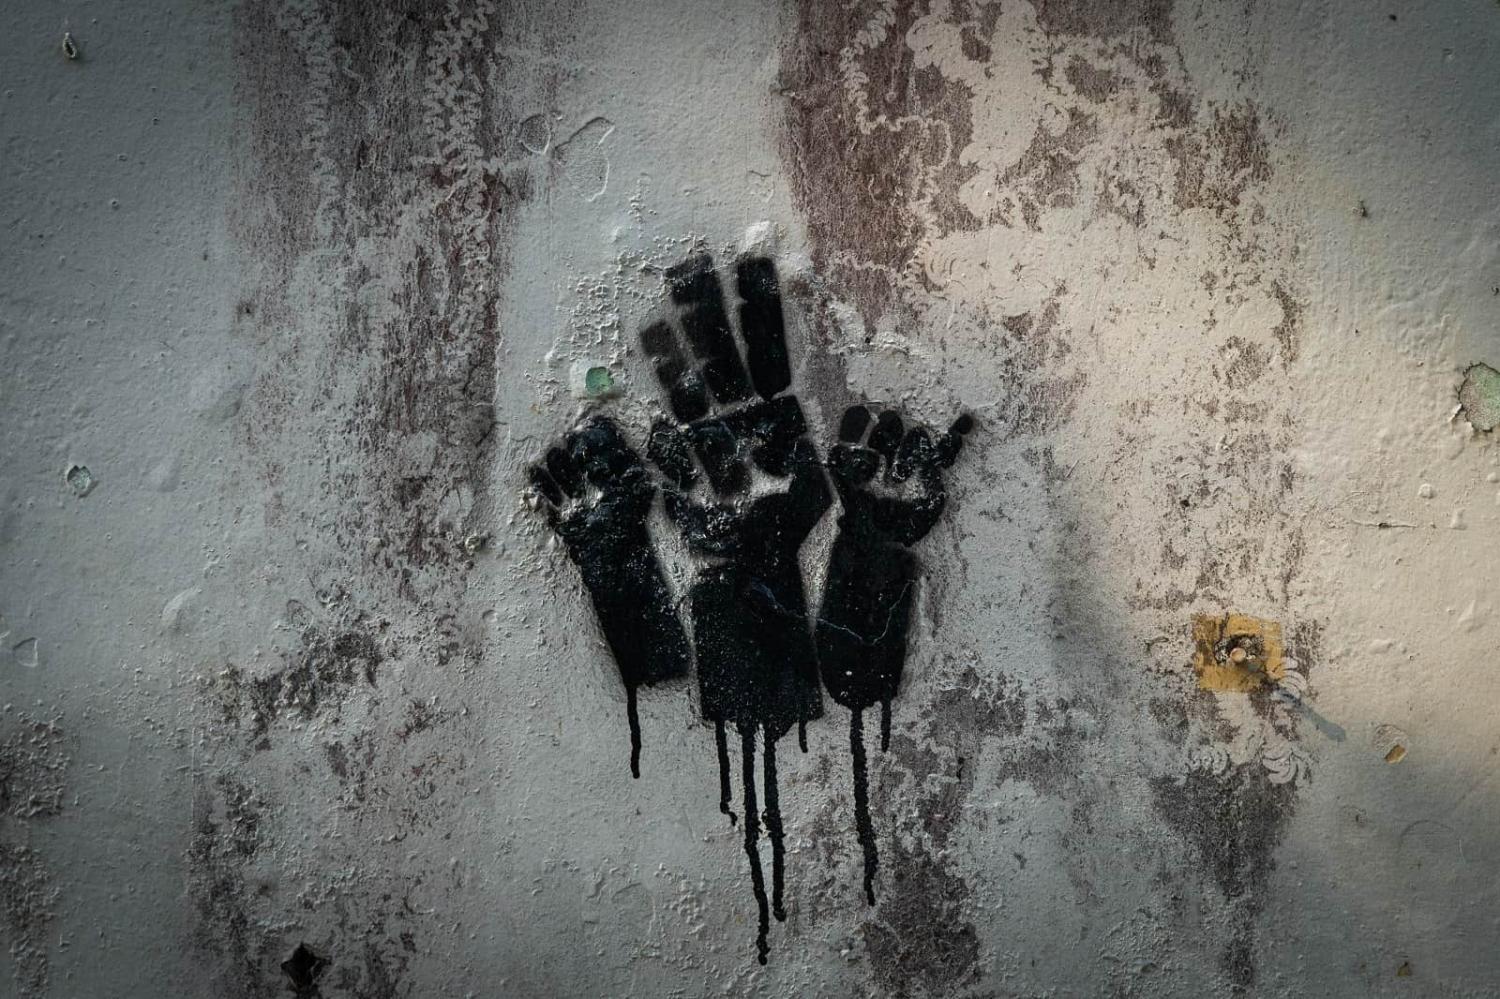 Graffiti in Yangon depicts the three-finger salute, a symbol adopted by pro-democracy resistance movements in Mynmar, 3 April 2023 (Matt Hunt/Anadolu Agency via Getty Images)